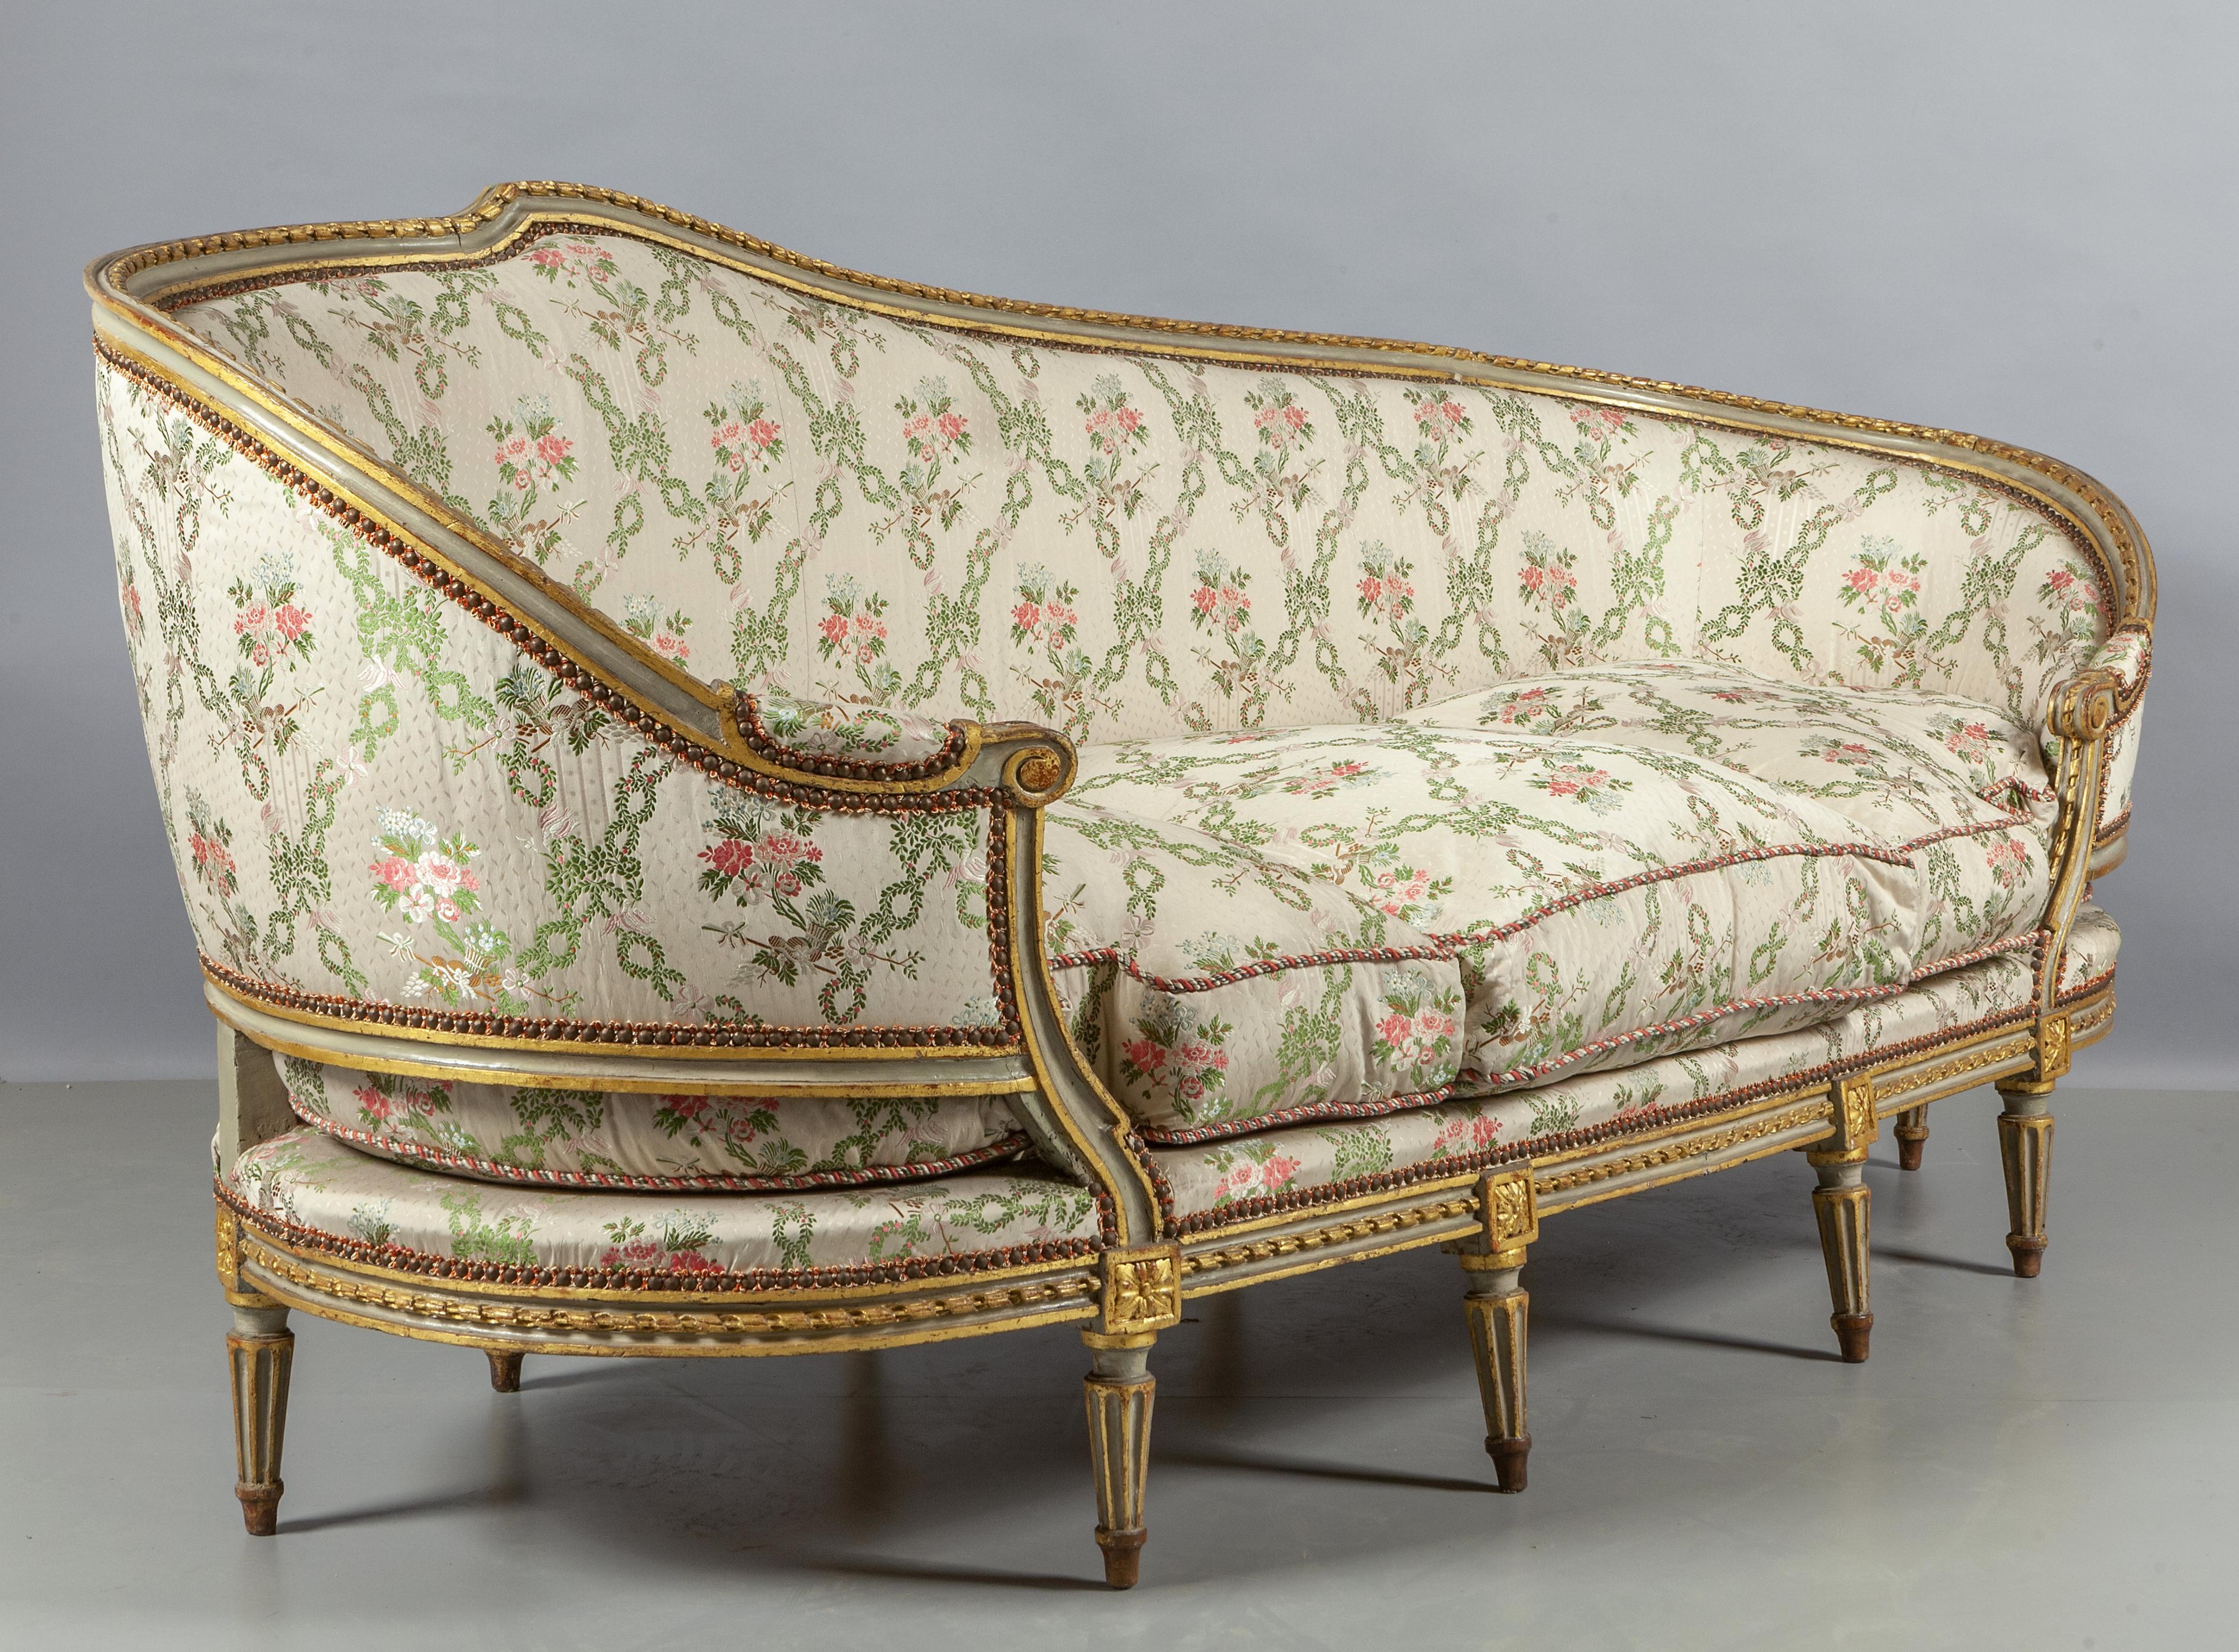 18th Century, French Laquered and Giltwood Louis XVI Sofa by Pierre Nicolas Pillot
Stamped 